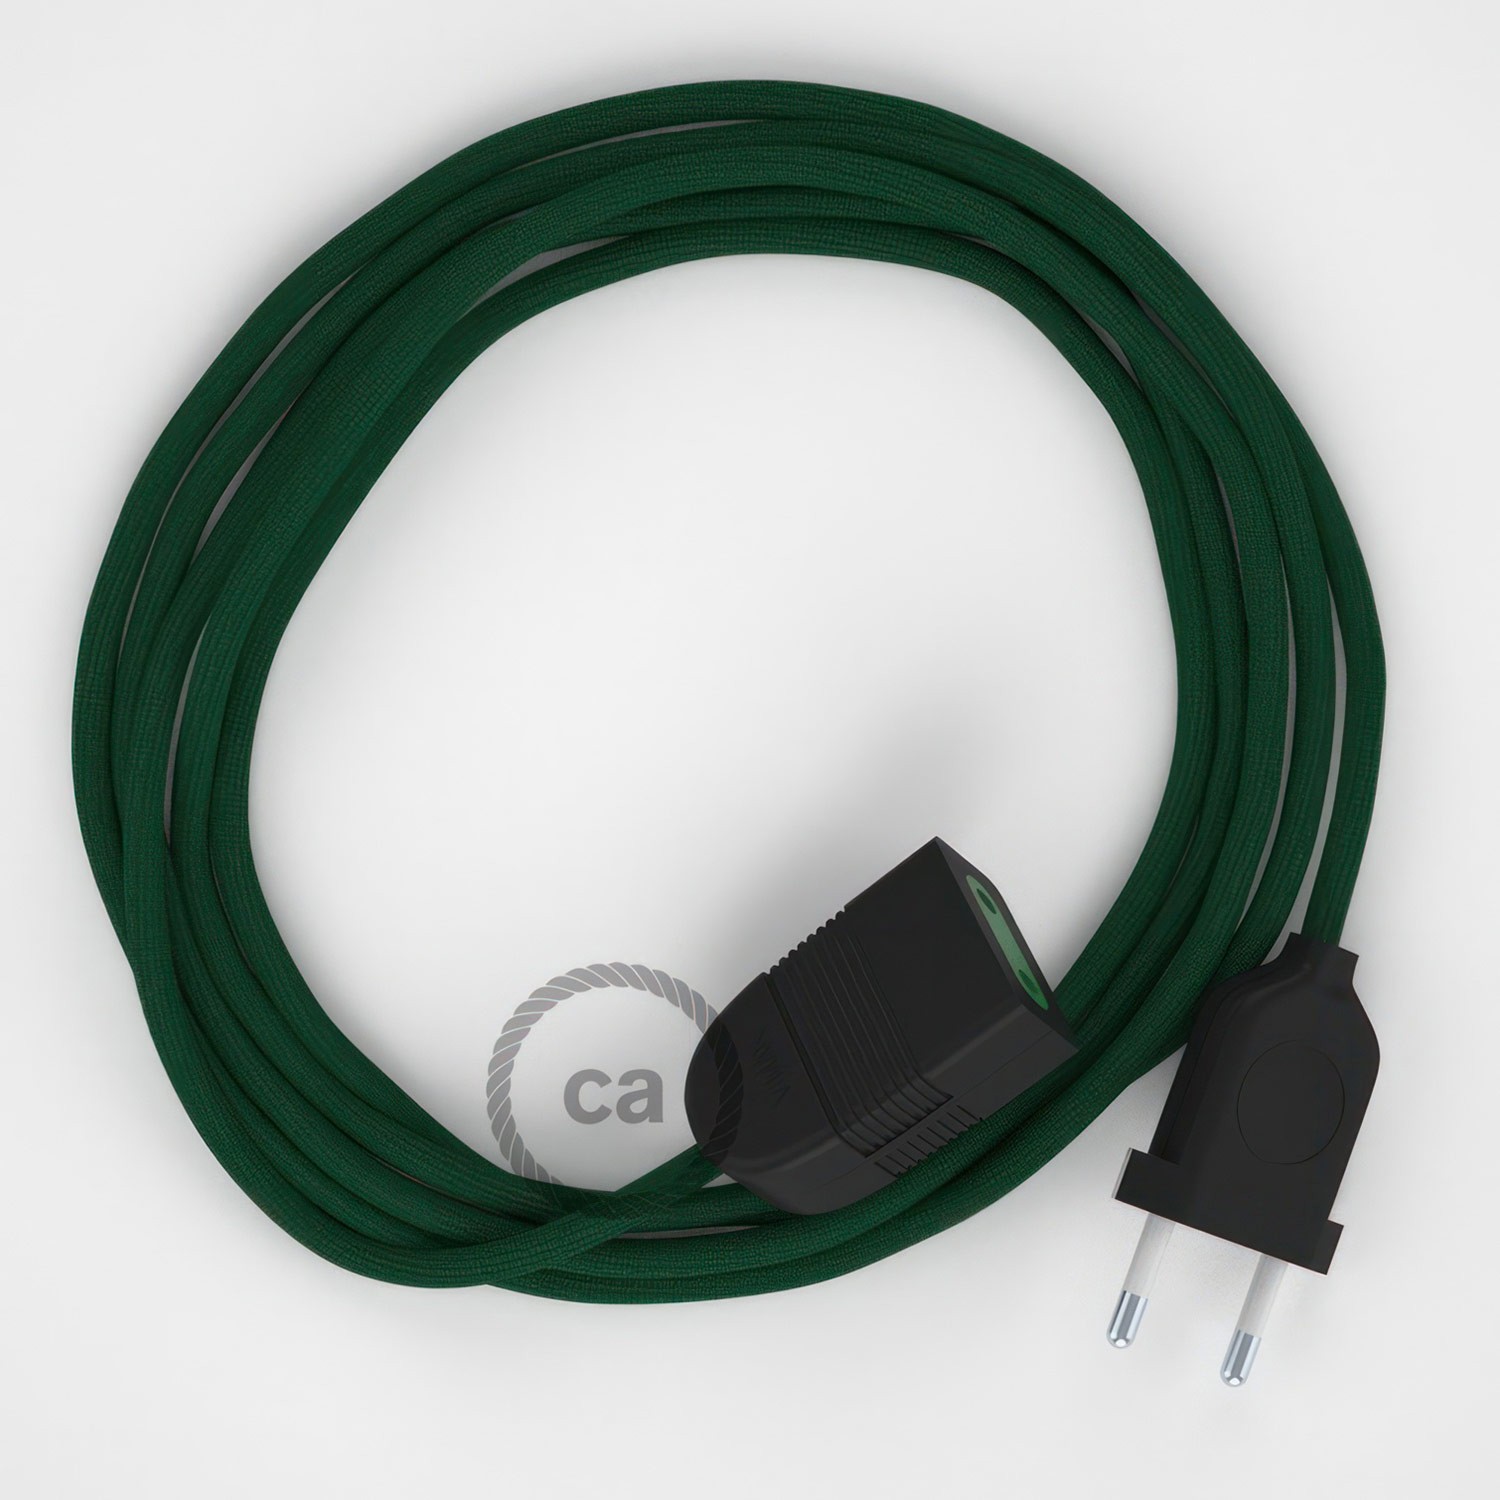 Dark Green Rayon fabric RM21 2P 10A Extension cable Made in Italy